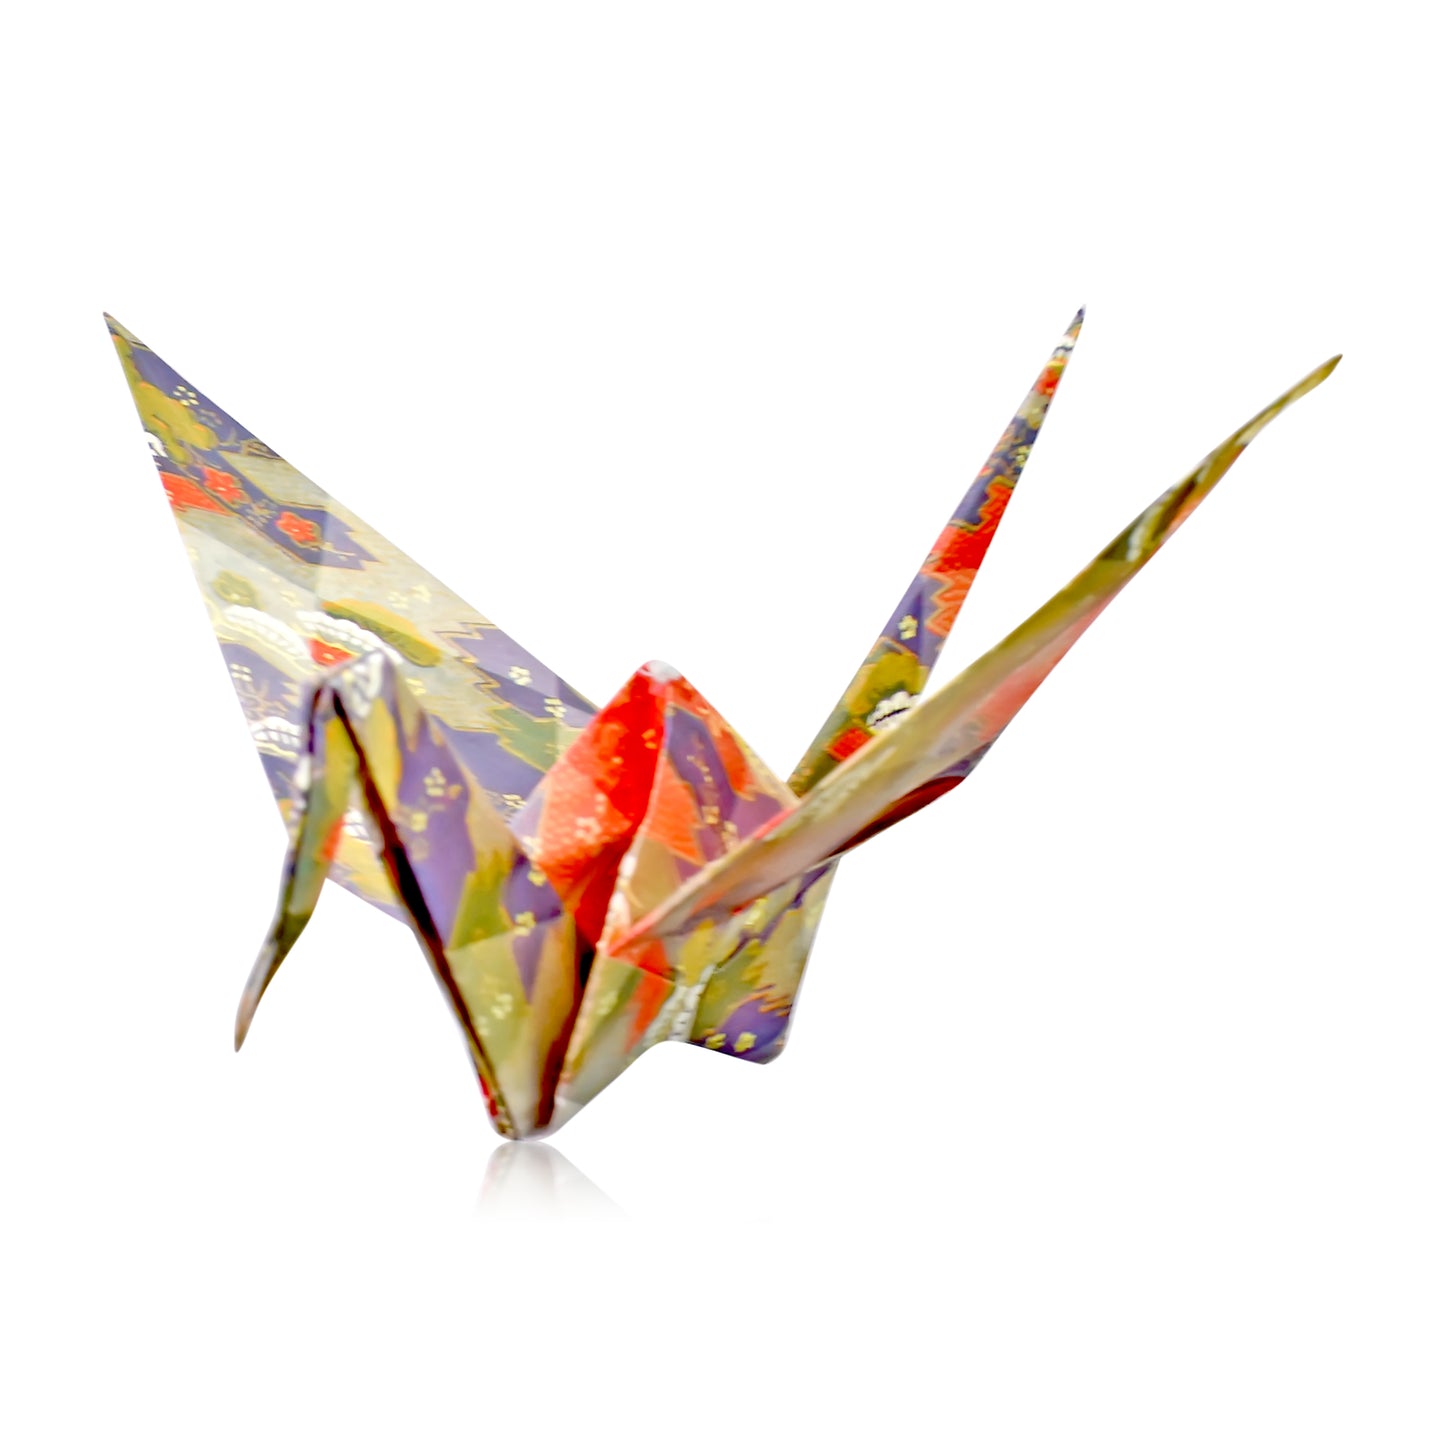 Give the Perfect Birthday Gift with Origami Cranes: December Birthstone